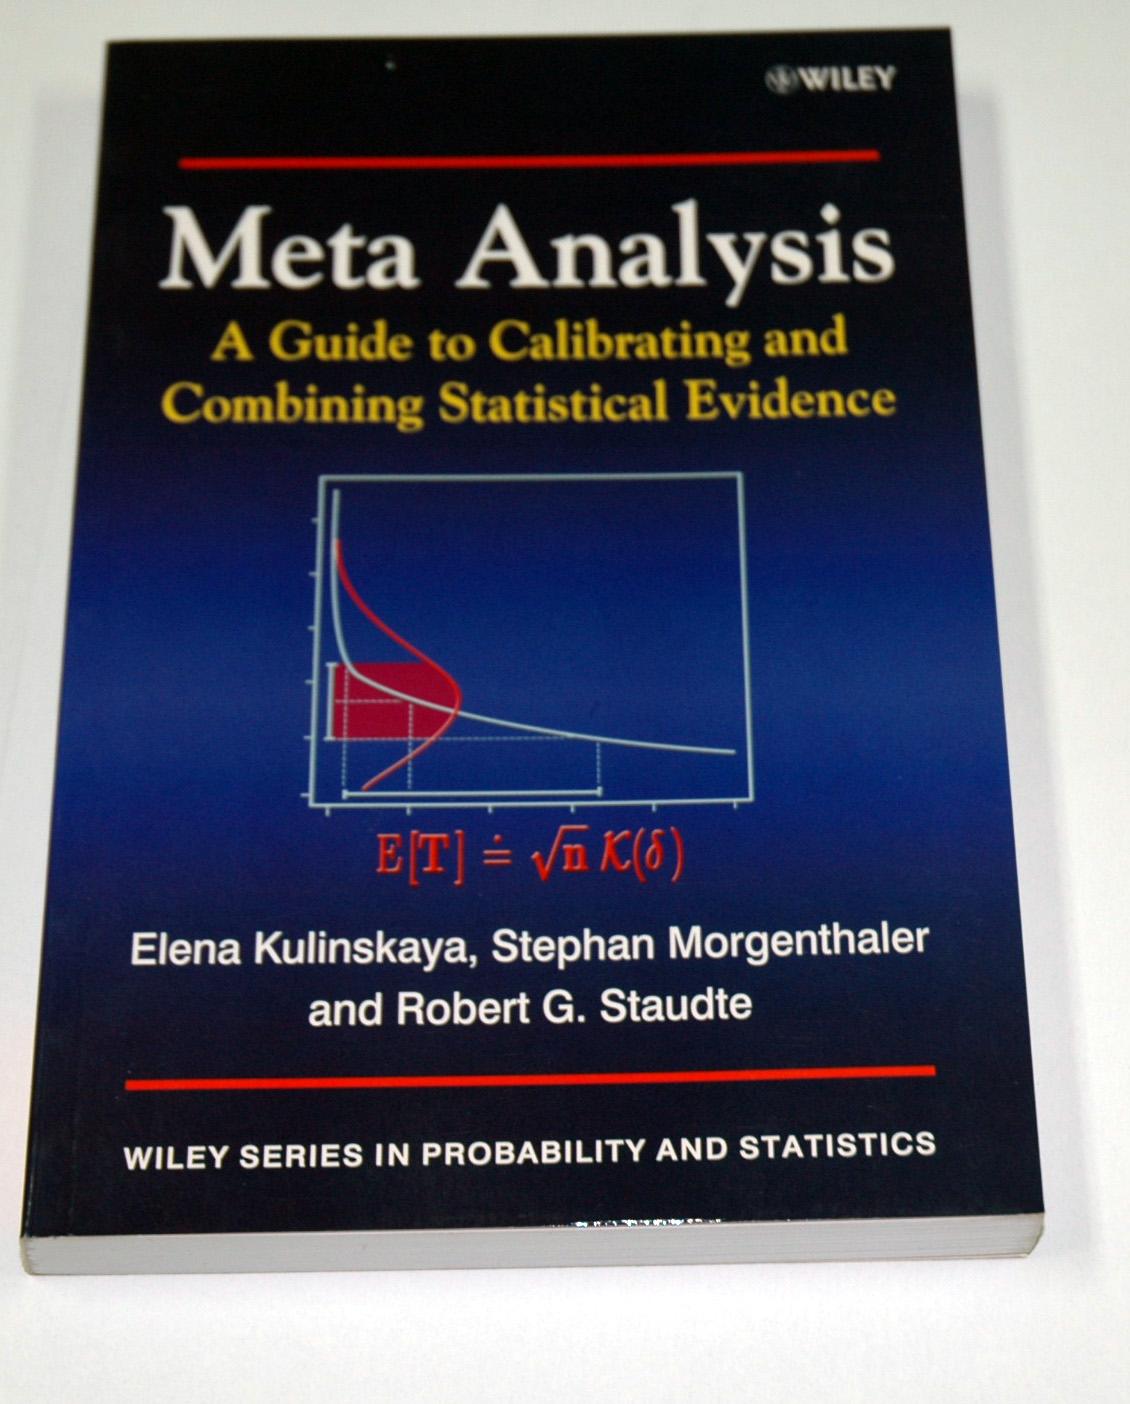 Meta-analysis - The Definitive Guide